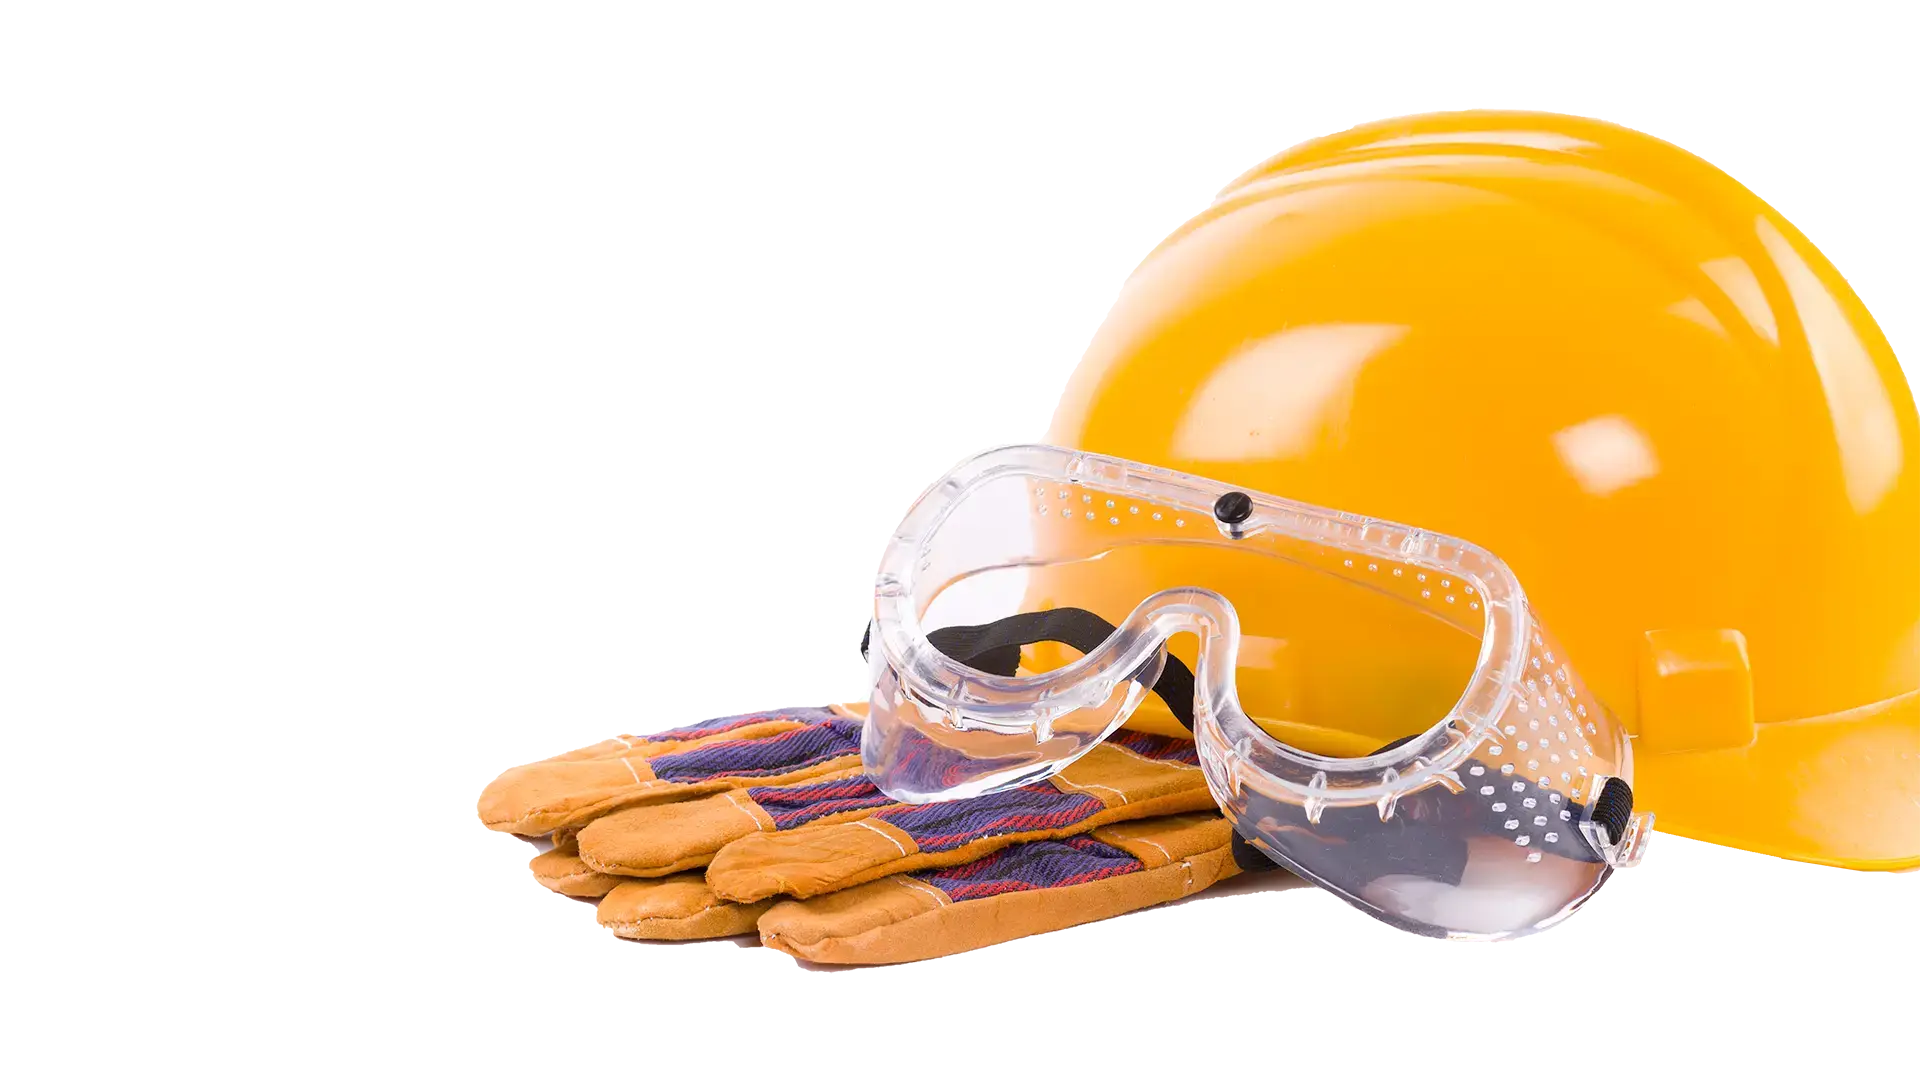 Factory safety equipment